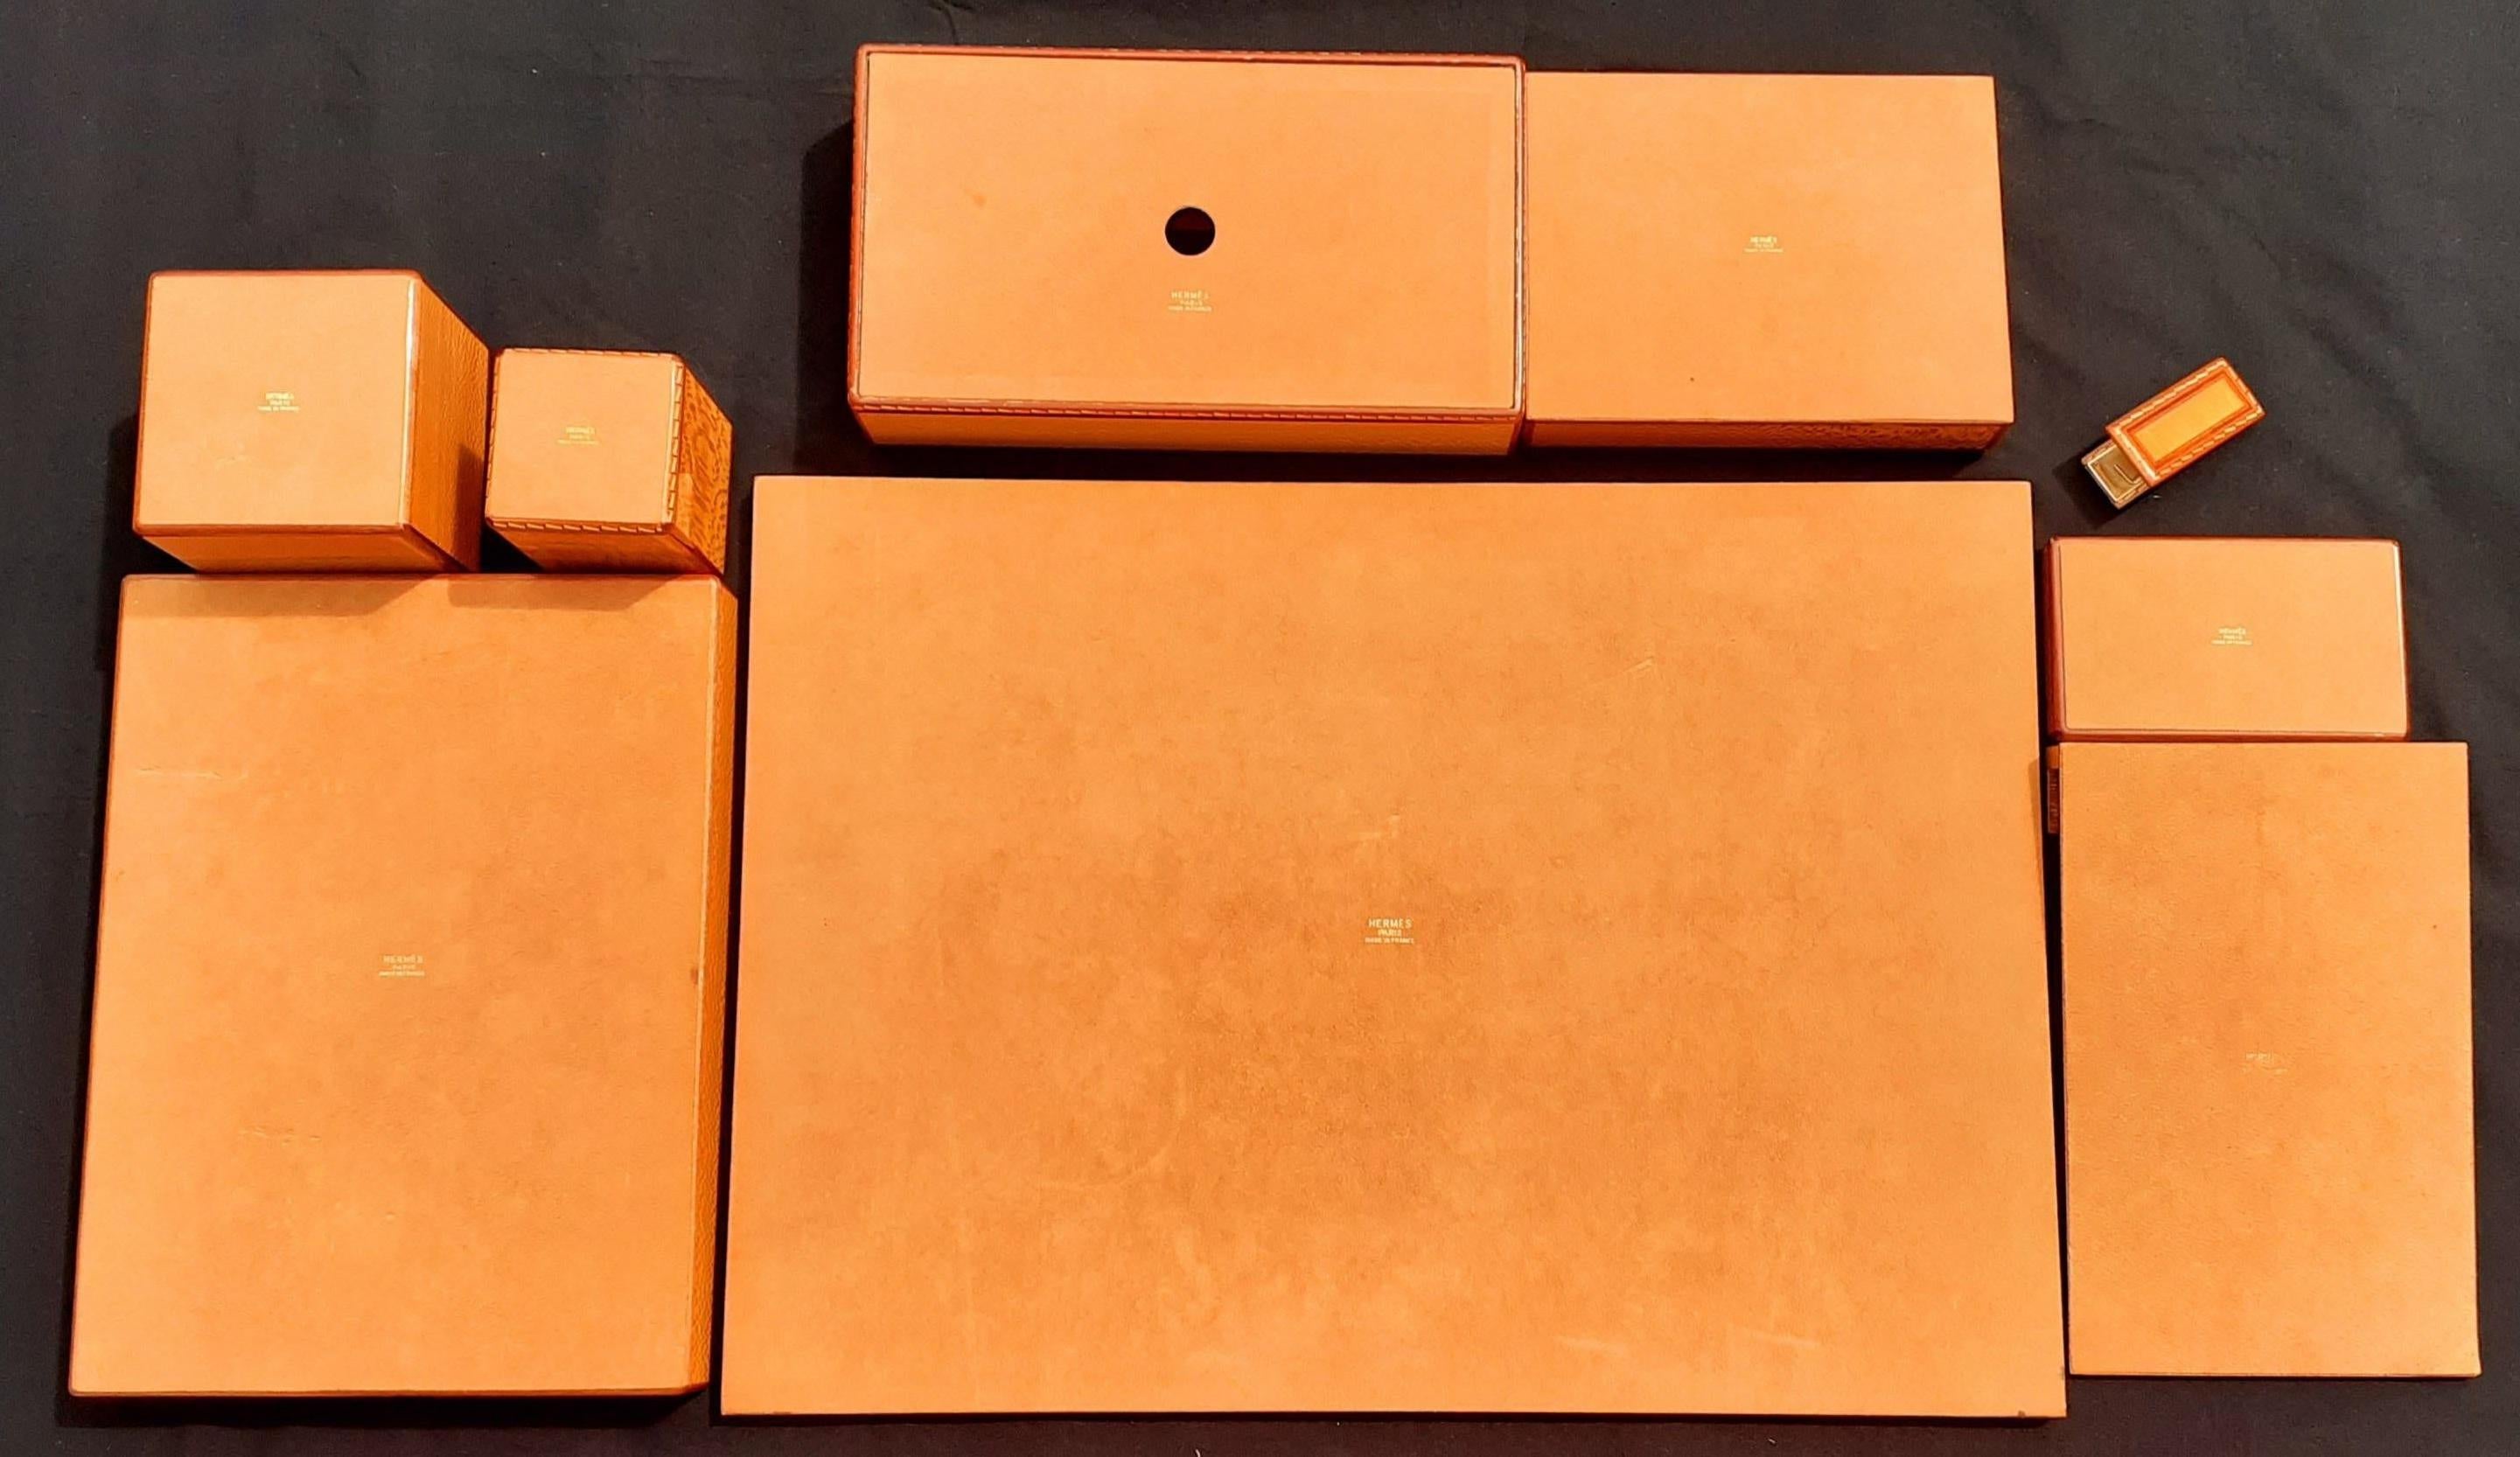 Exceptional Hermès 9 Pieces Desk Set in Lacquered Wood RARE 1